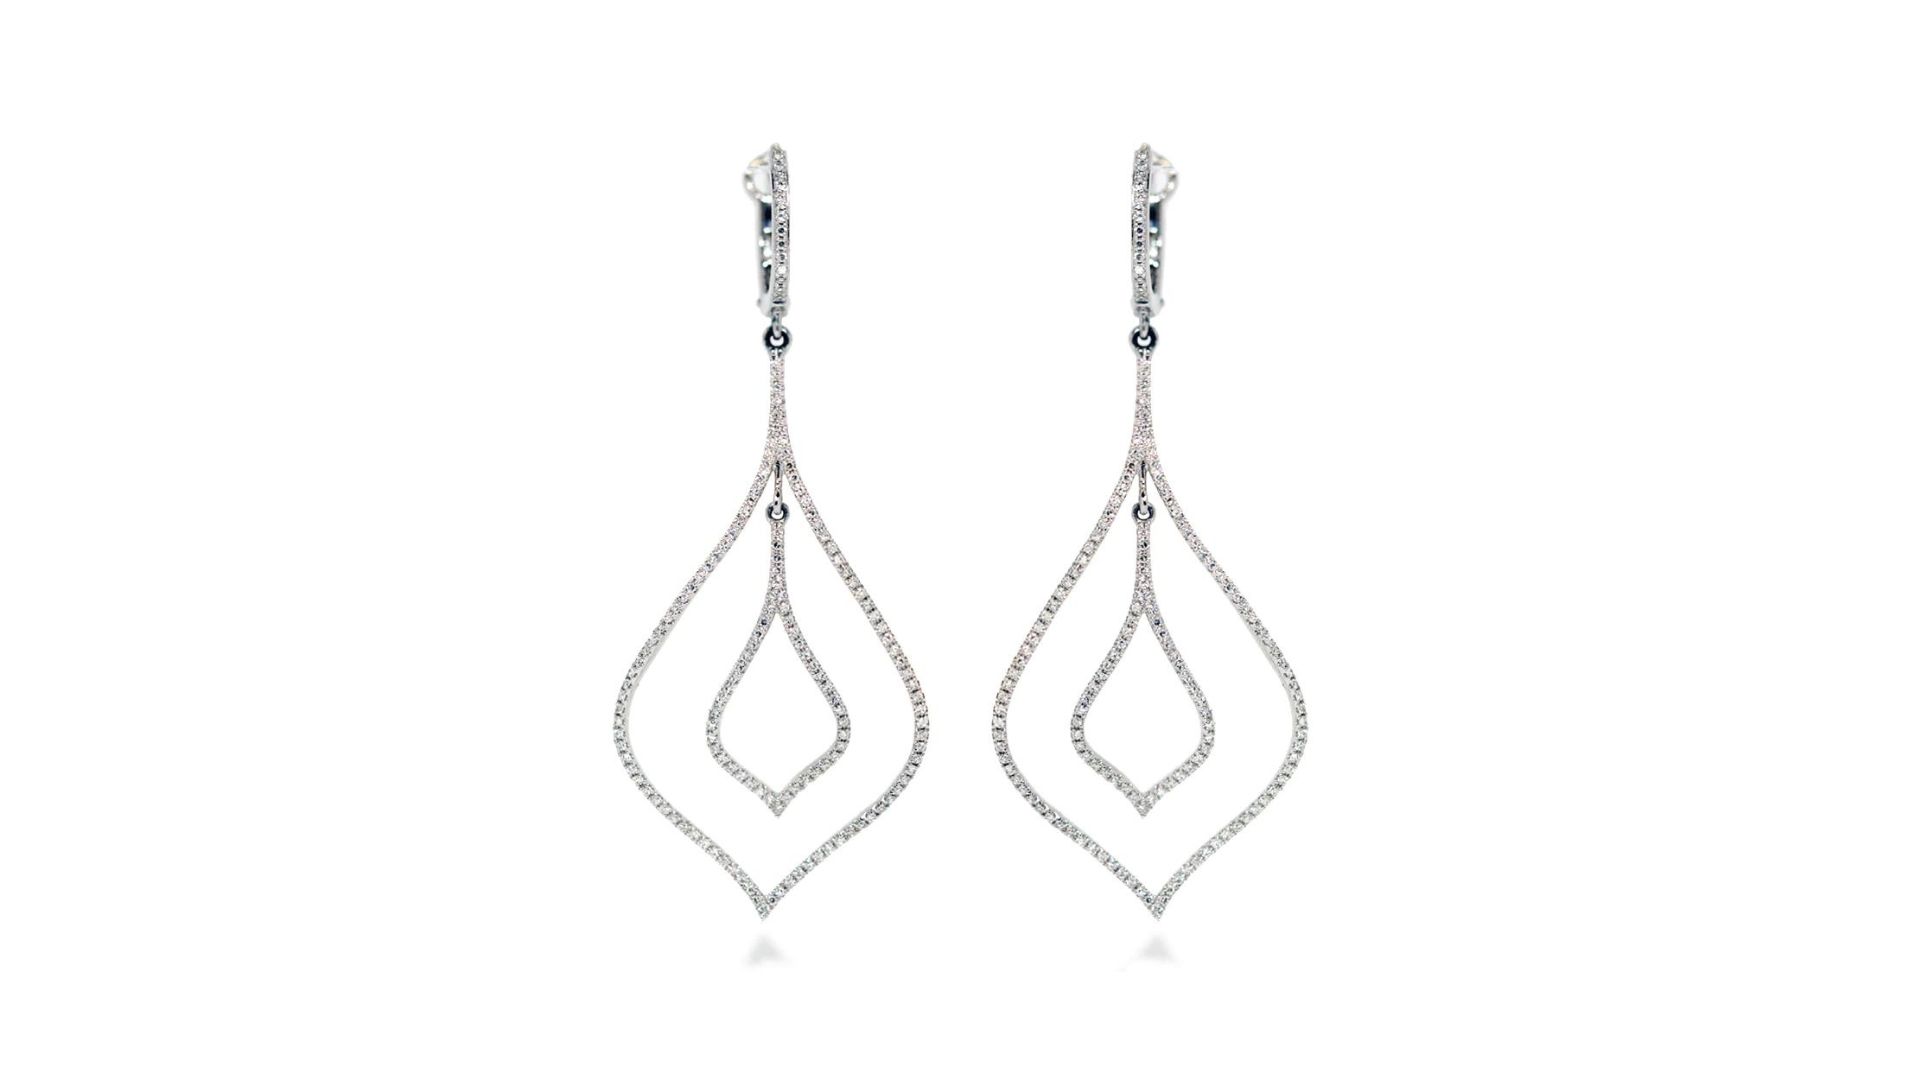 Diamond Chandelier Earrings - Elevate Your Look With Timeless Glamour